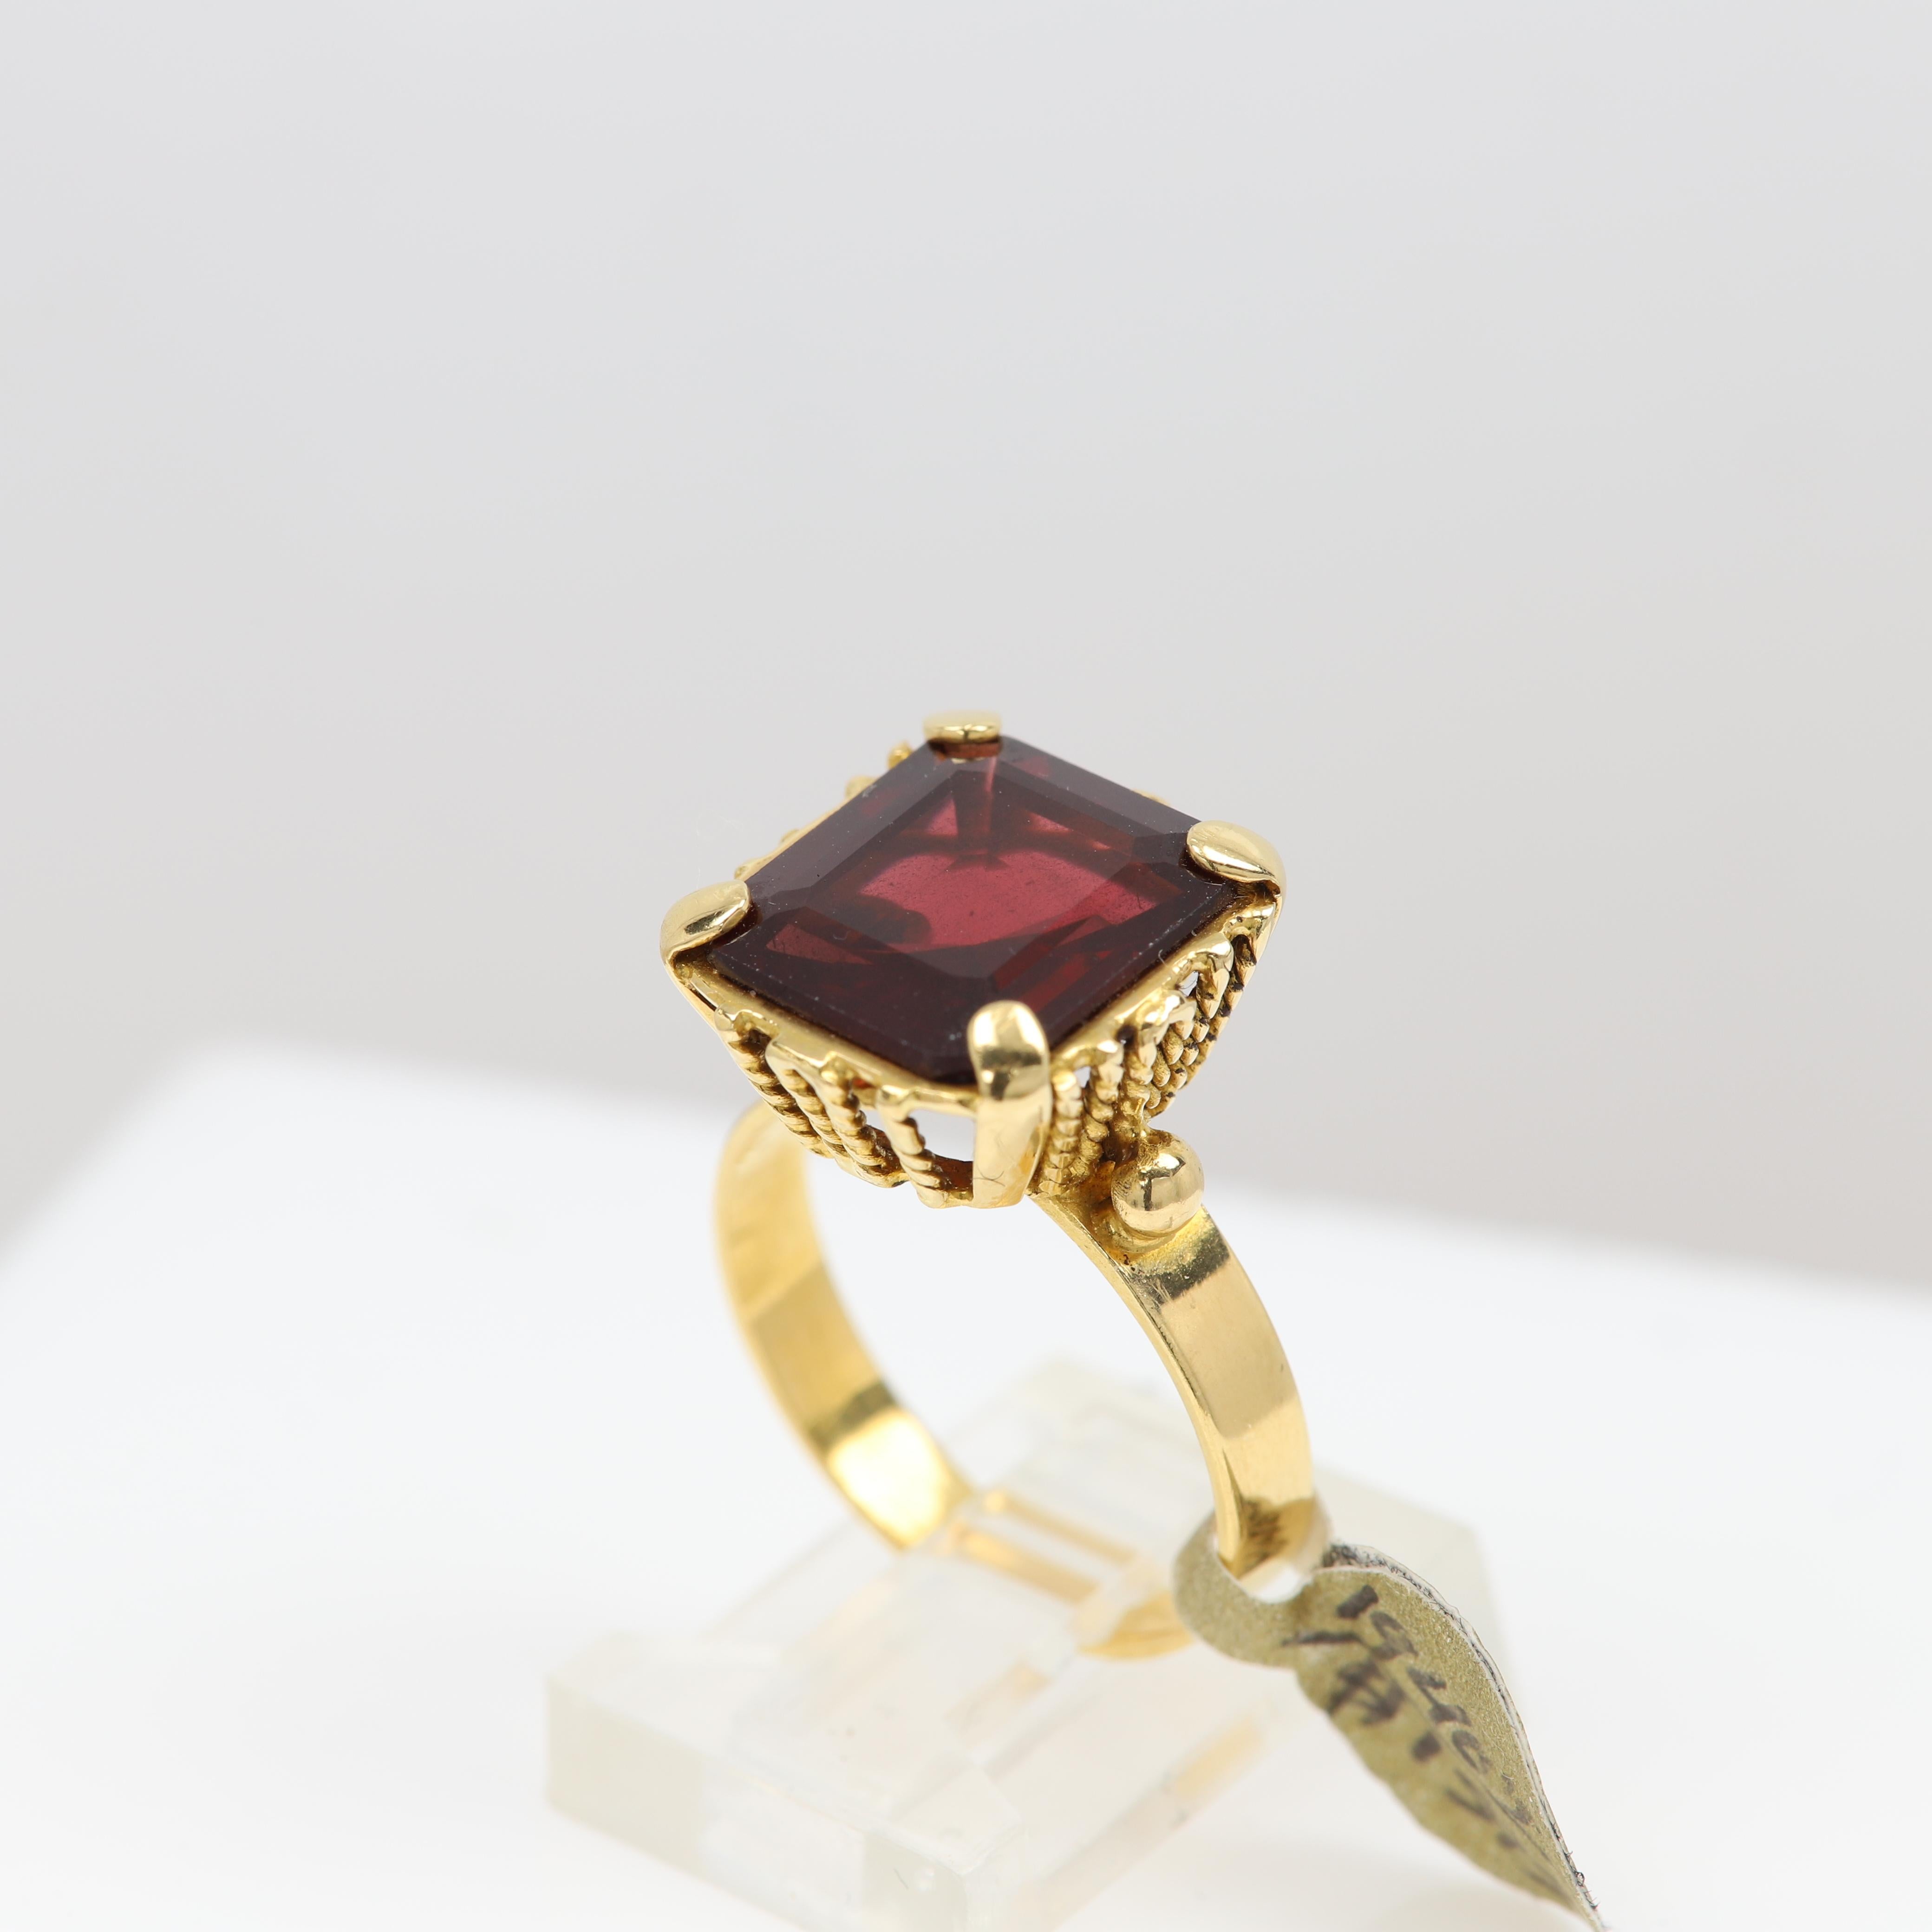 Vintage Garnet Ring (might be even be antique estimate is 1950 or before)
14k Yellow Gold 6.3 grams
Flinger size 7
Natural Garnet Size is approx. 12 x 12 mm
approx. weight  7.50 carat
Previously owned - as new condition
The tone is very clean, and